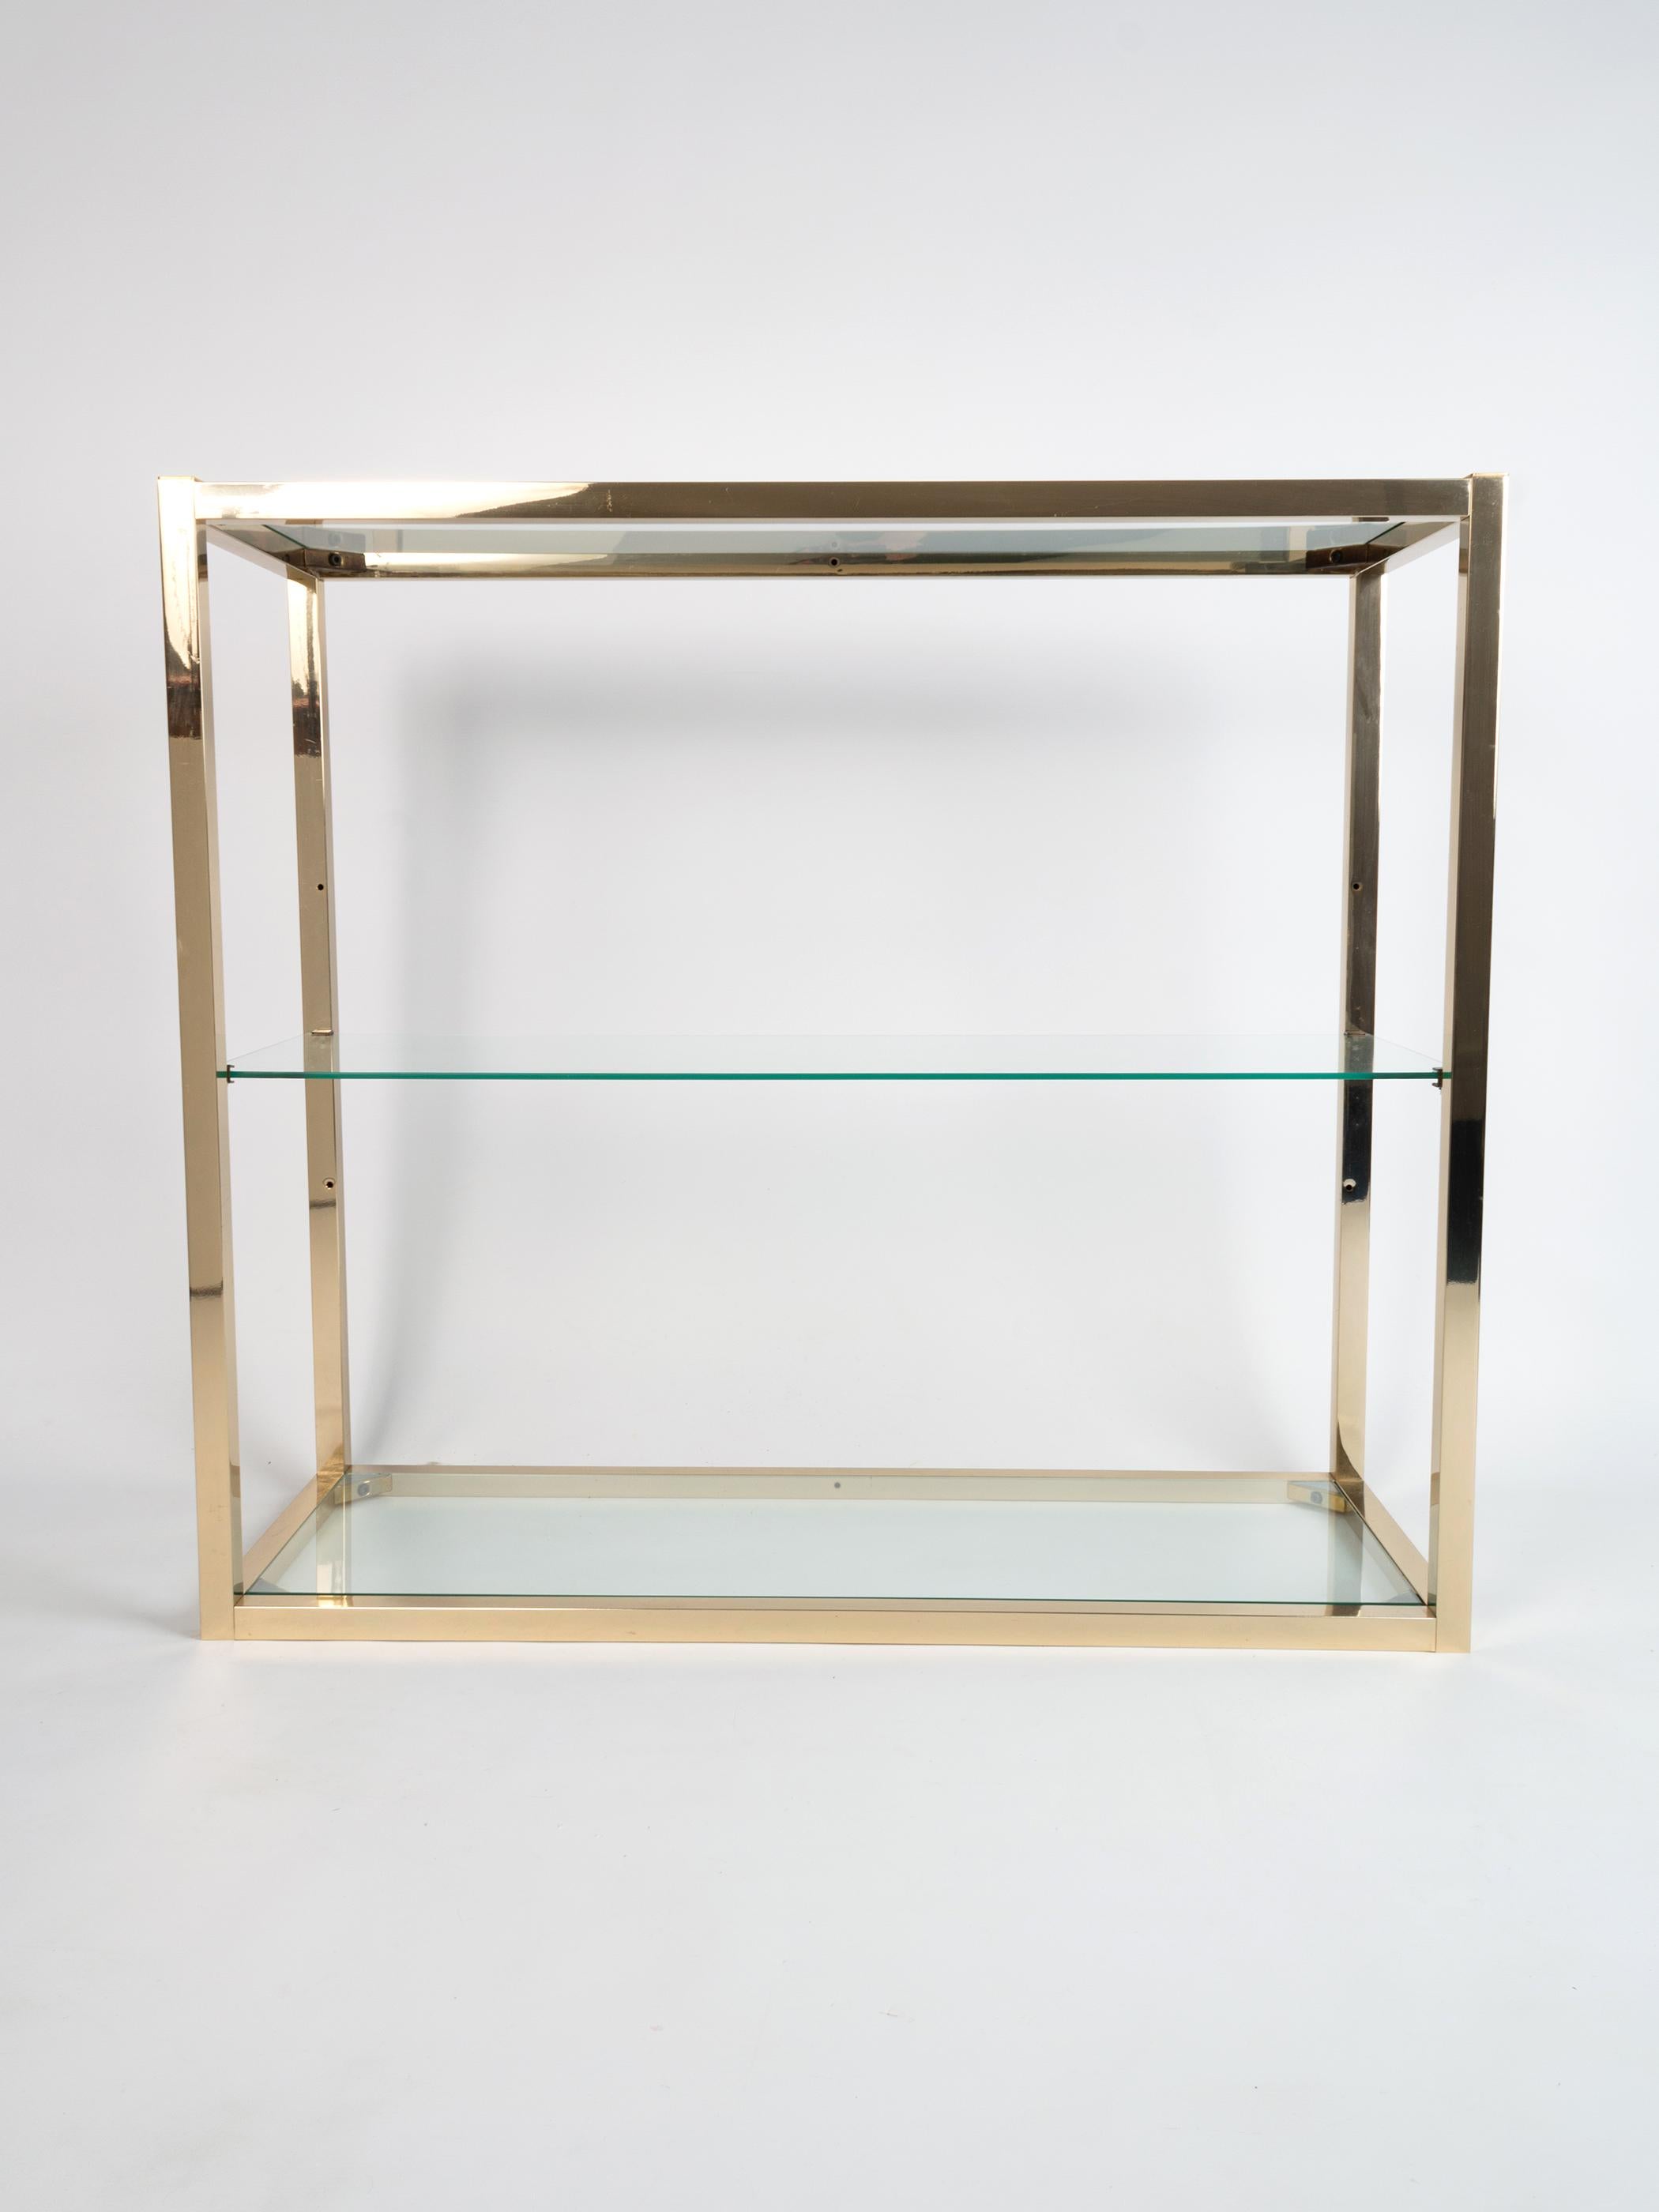 Romeo Rega Gold Plated Brass Etagere Shelving Console, Italy, C.1960
In excellent condition commensurate of age.